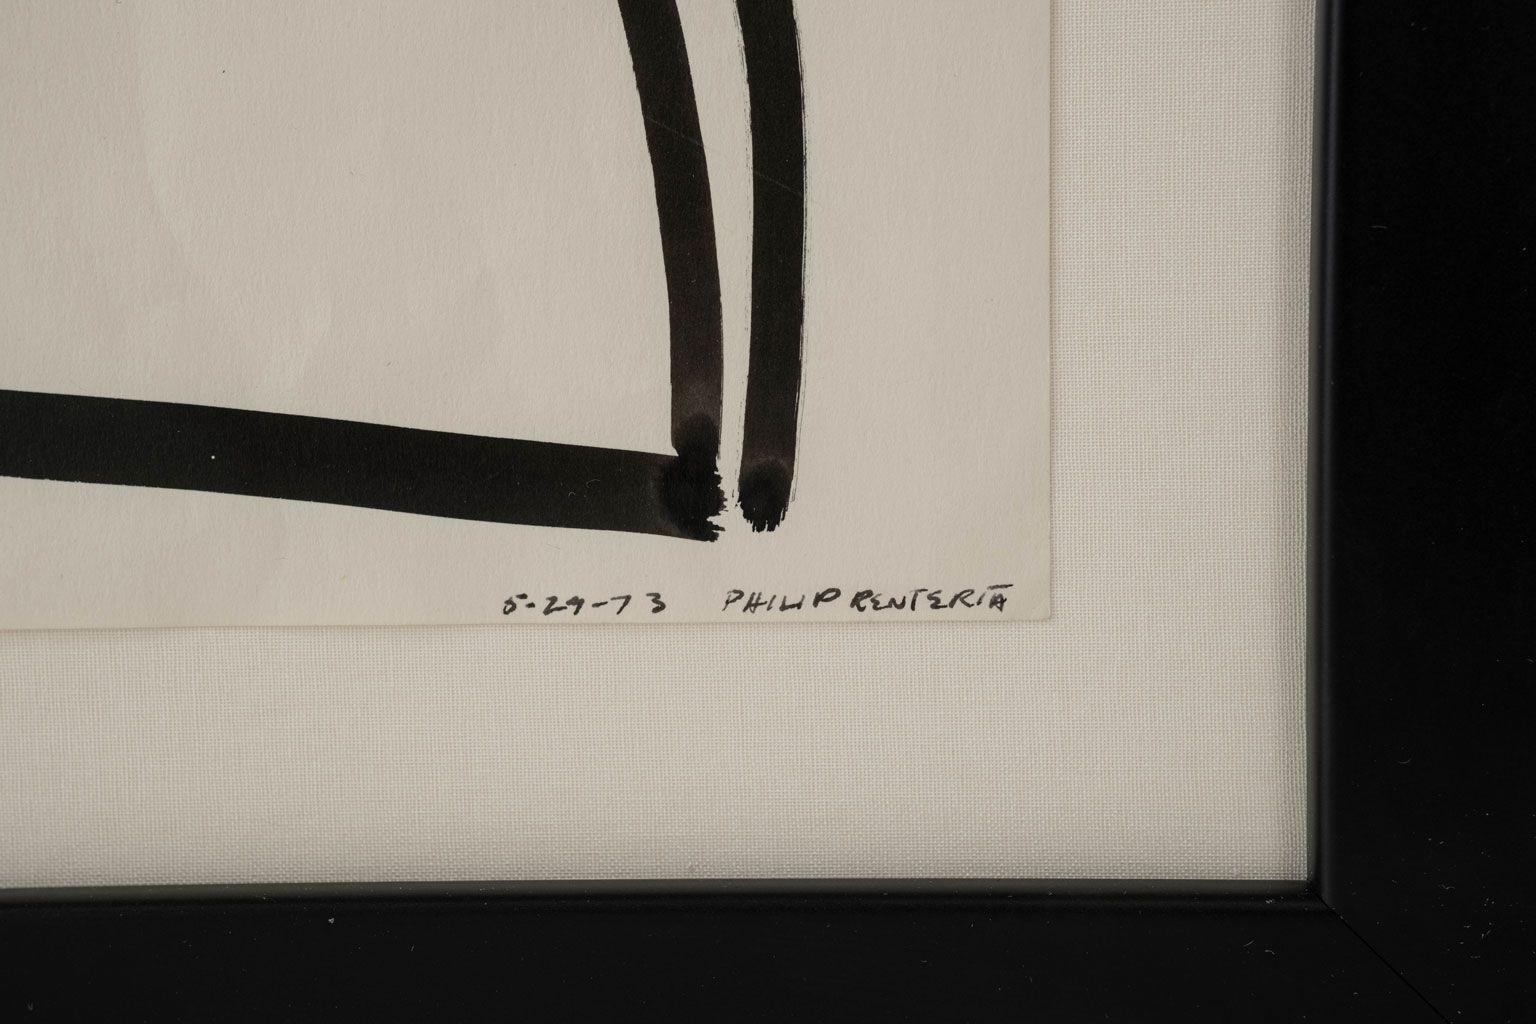 Hand-Painted Minimal Black-and-White Abstract Ink-on-Paper by Philip Renteria (1973)